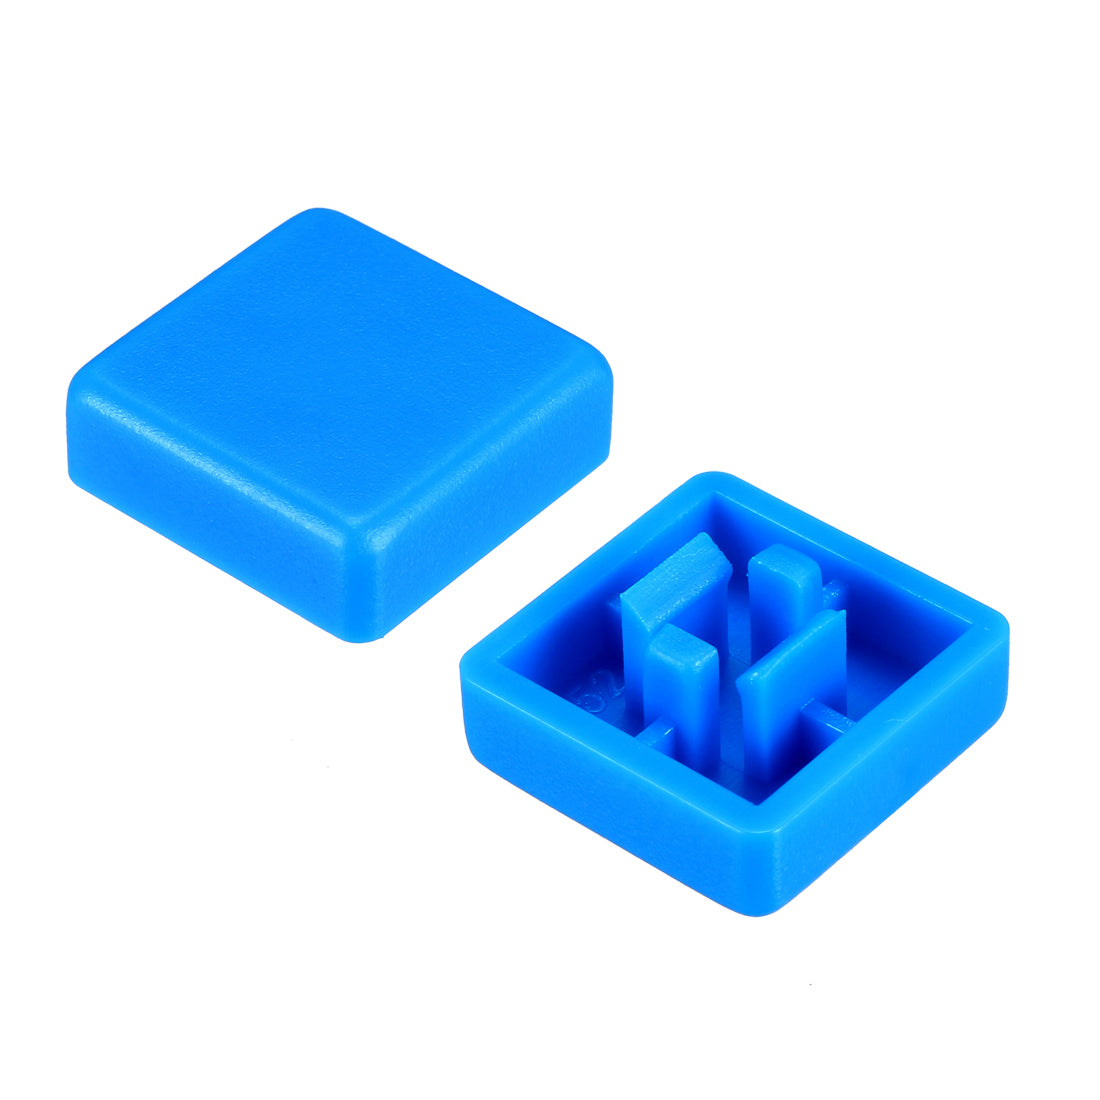 uxcell Uxcell 20Pcs Plastic 12x12mm Pushbutton Tactile Switch Caps Cover Keycaps Blue for 12x12x7.3mm Tact Switch